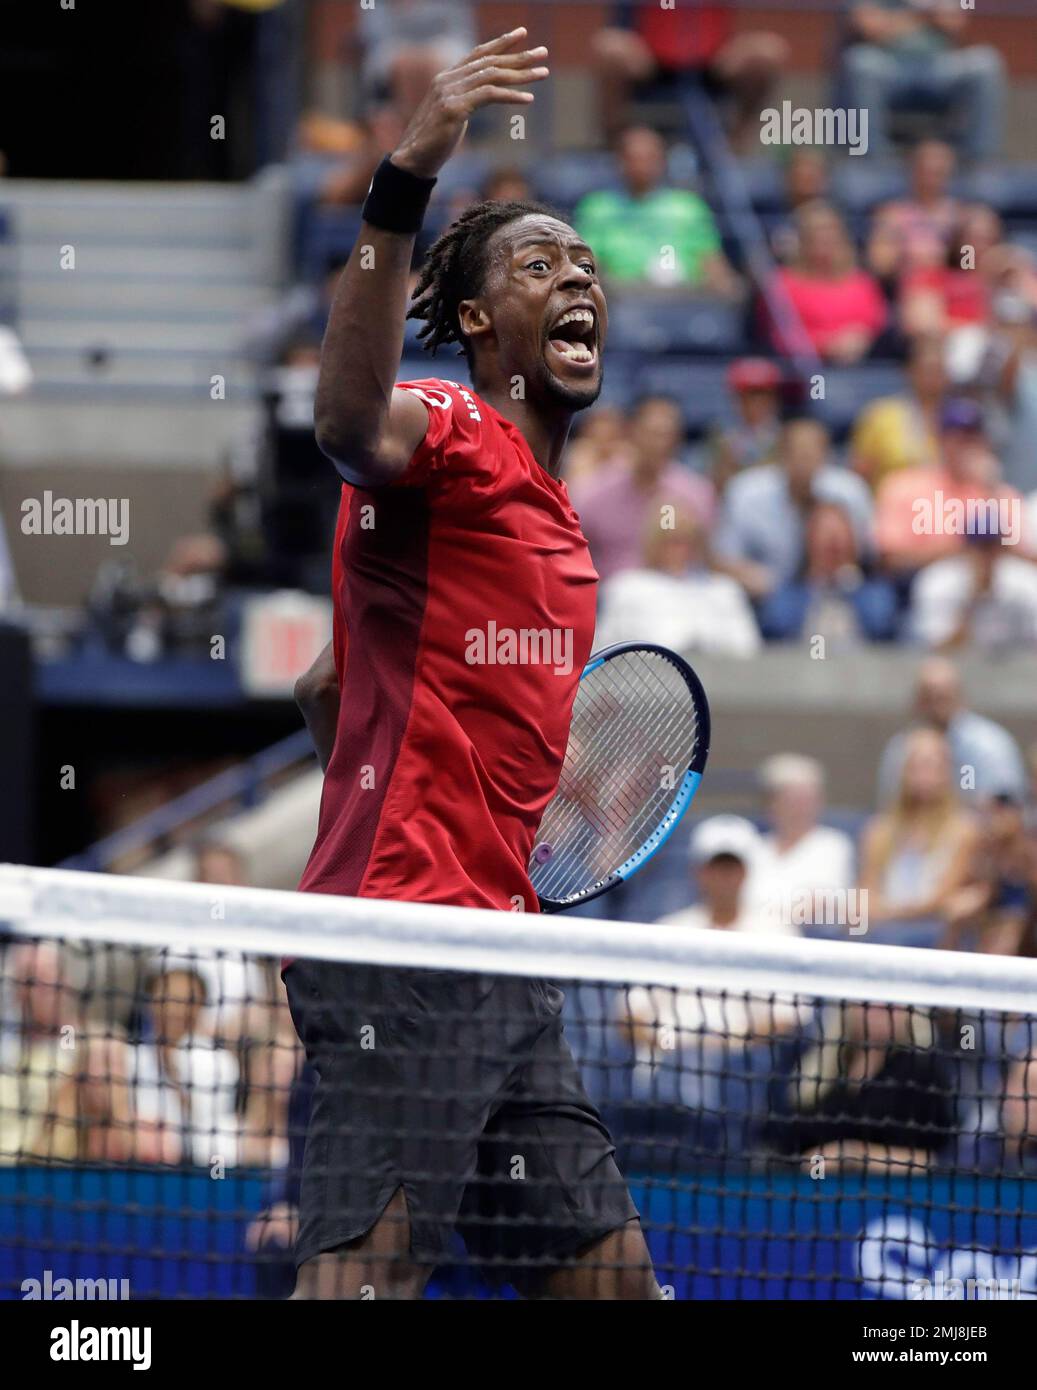 Gael Monfils, of France, reacts after winning a point against Matteo Berrettini, of Italy, during the quarterfinals of the U.S. Open tennis championships Wednesday, Sept